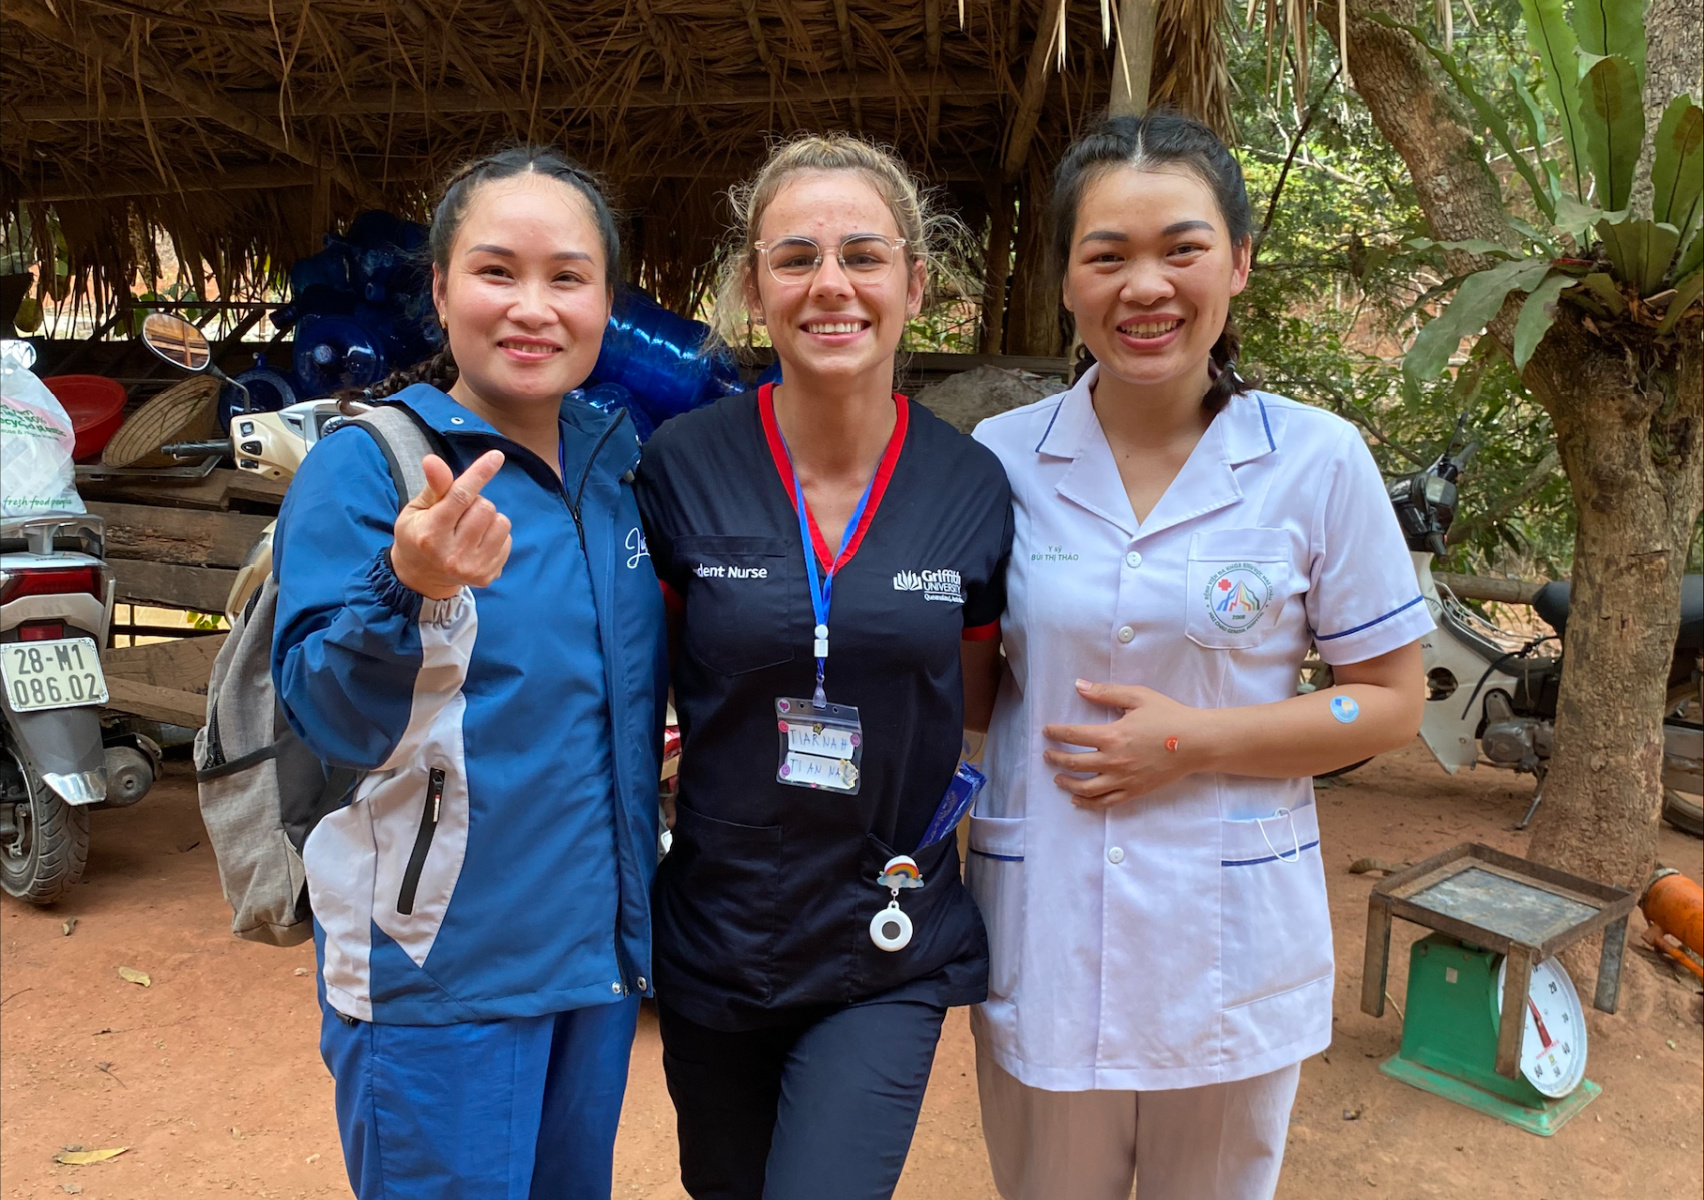 Three female clinicians stand arm in arm in a rural metro setting 